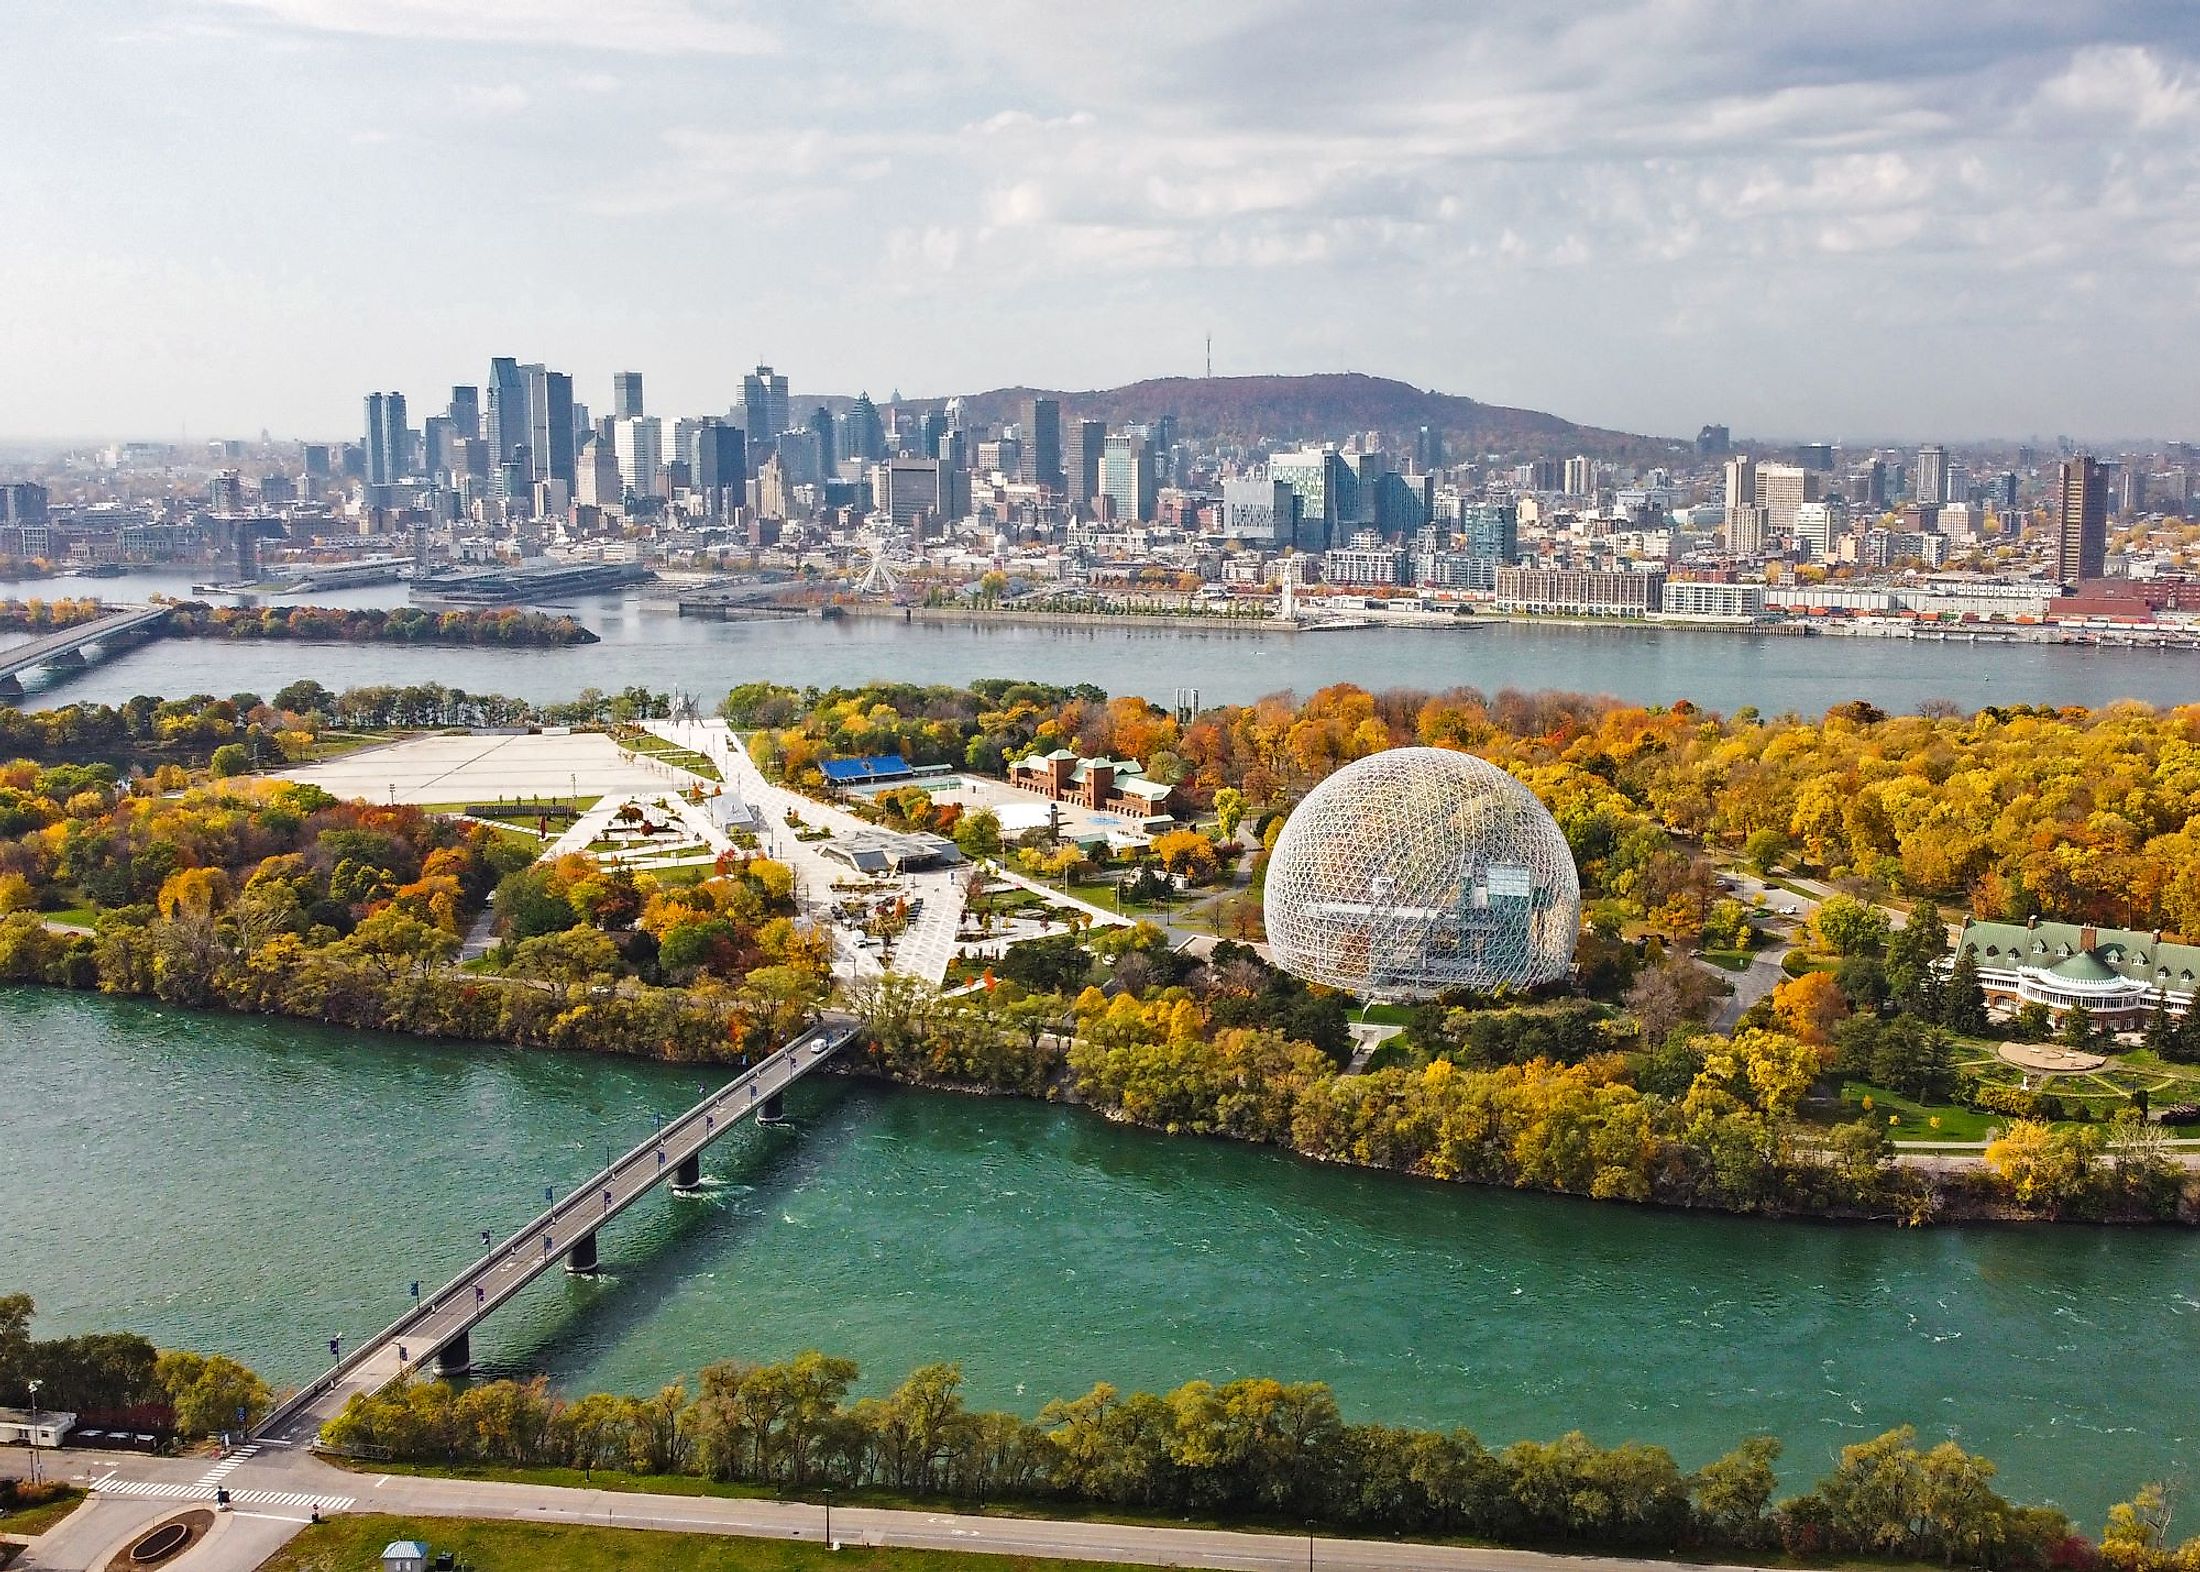 Aerial view of Montreal showing the Biosphere Environment Museum and Saint Lawrence River during fall season in Quebec, Canada. 